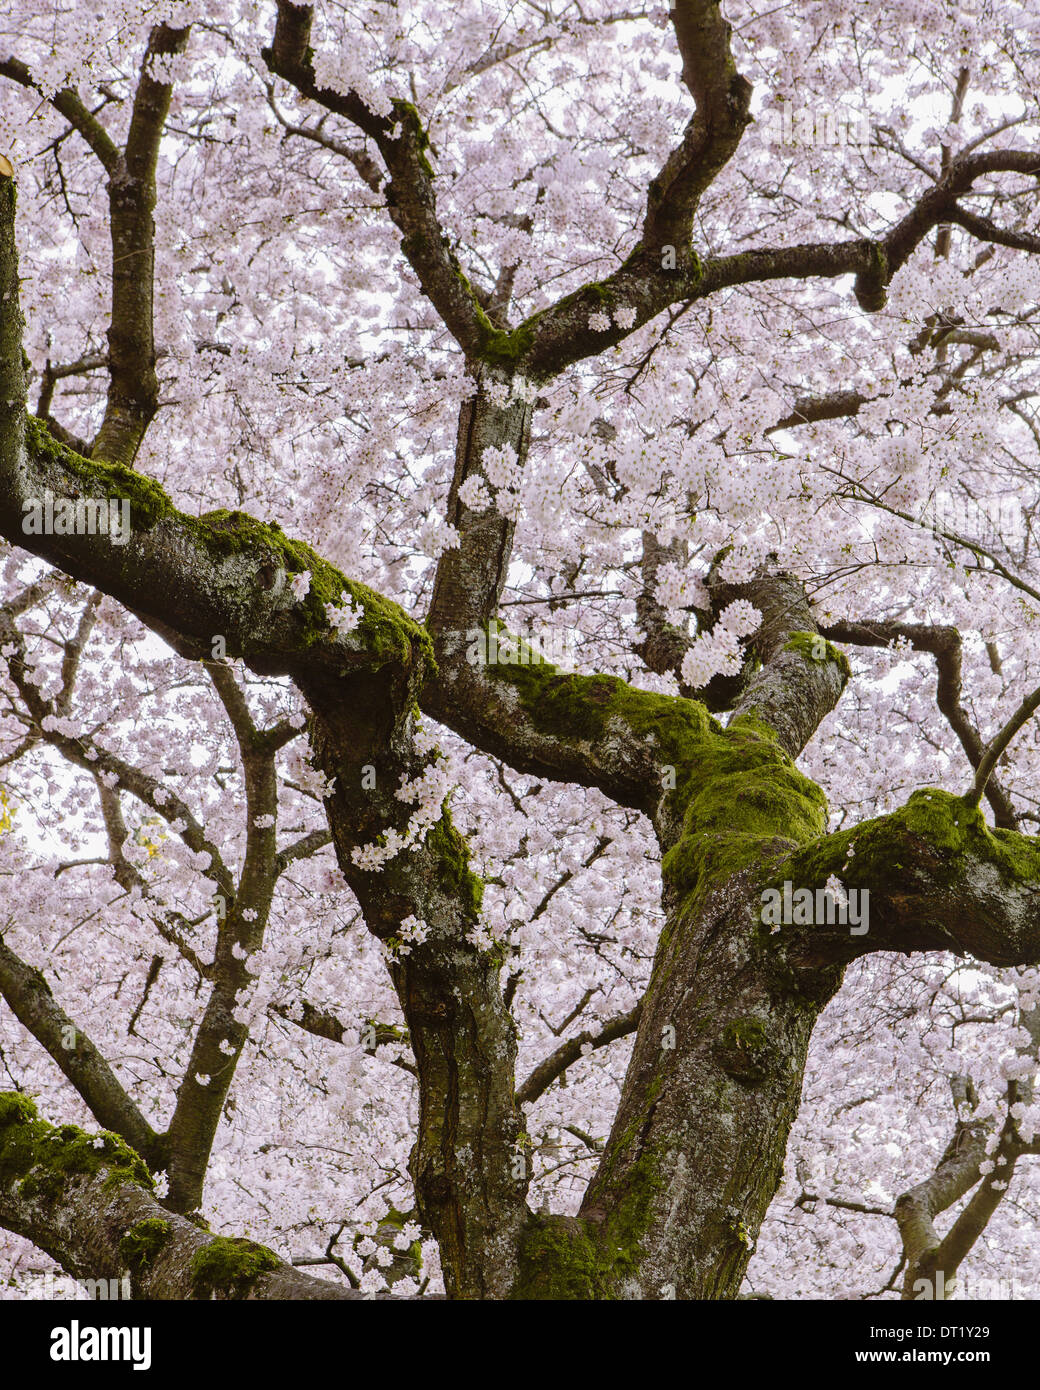 Frothy pink cherry blossom on cherry trees in spring in Washington state USA Stock Photo